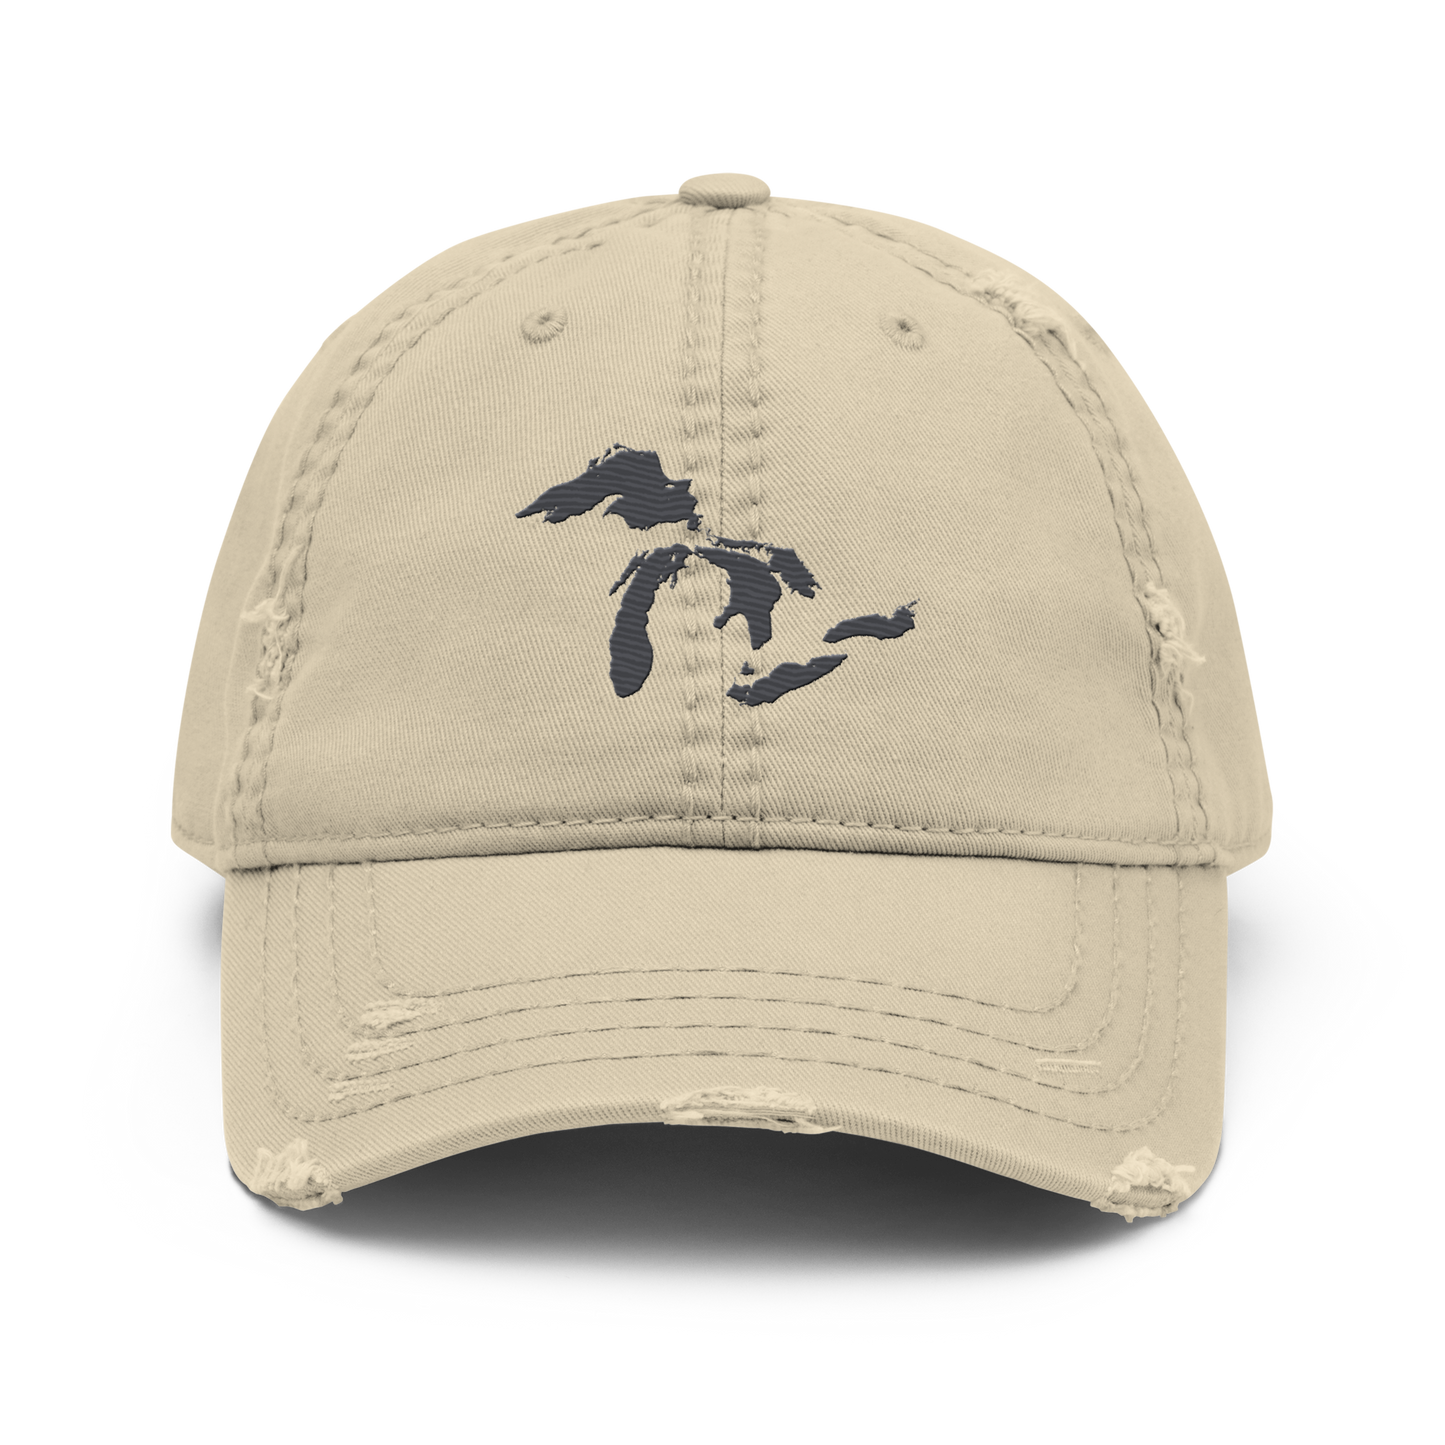 Great Lakes Distressed Dad Hat (Iron Ore Grey)